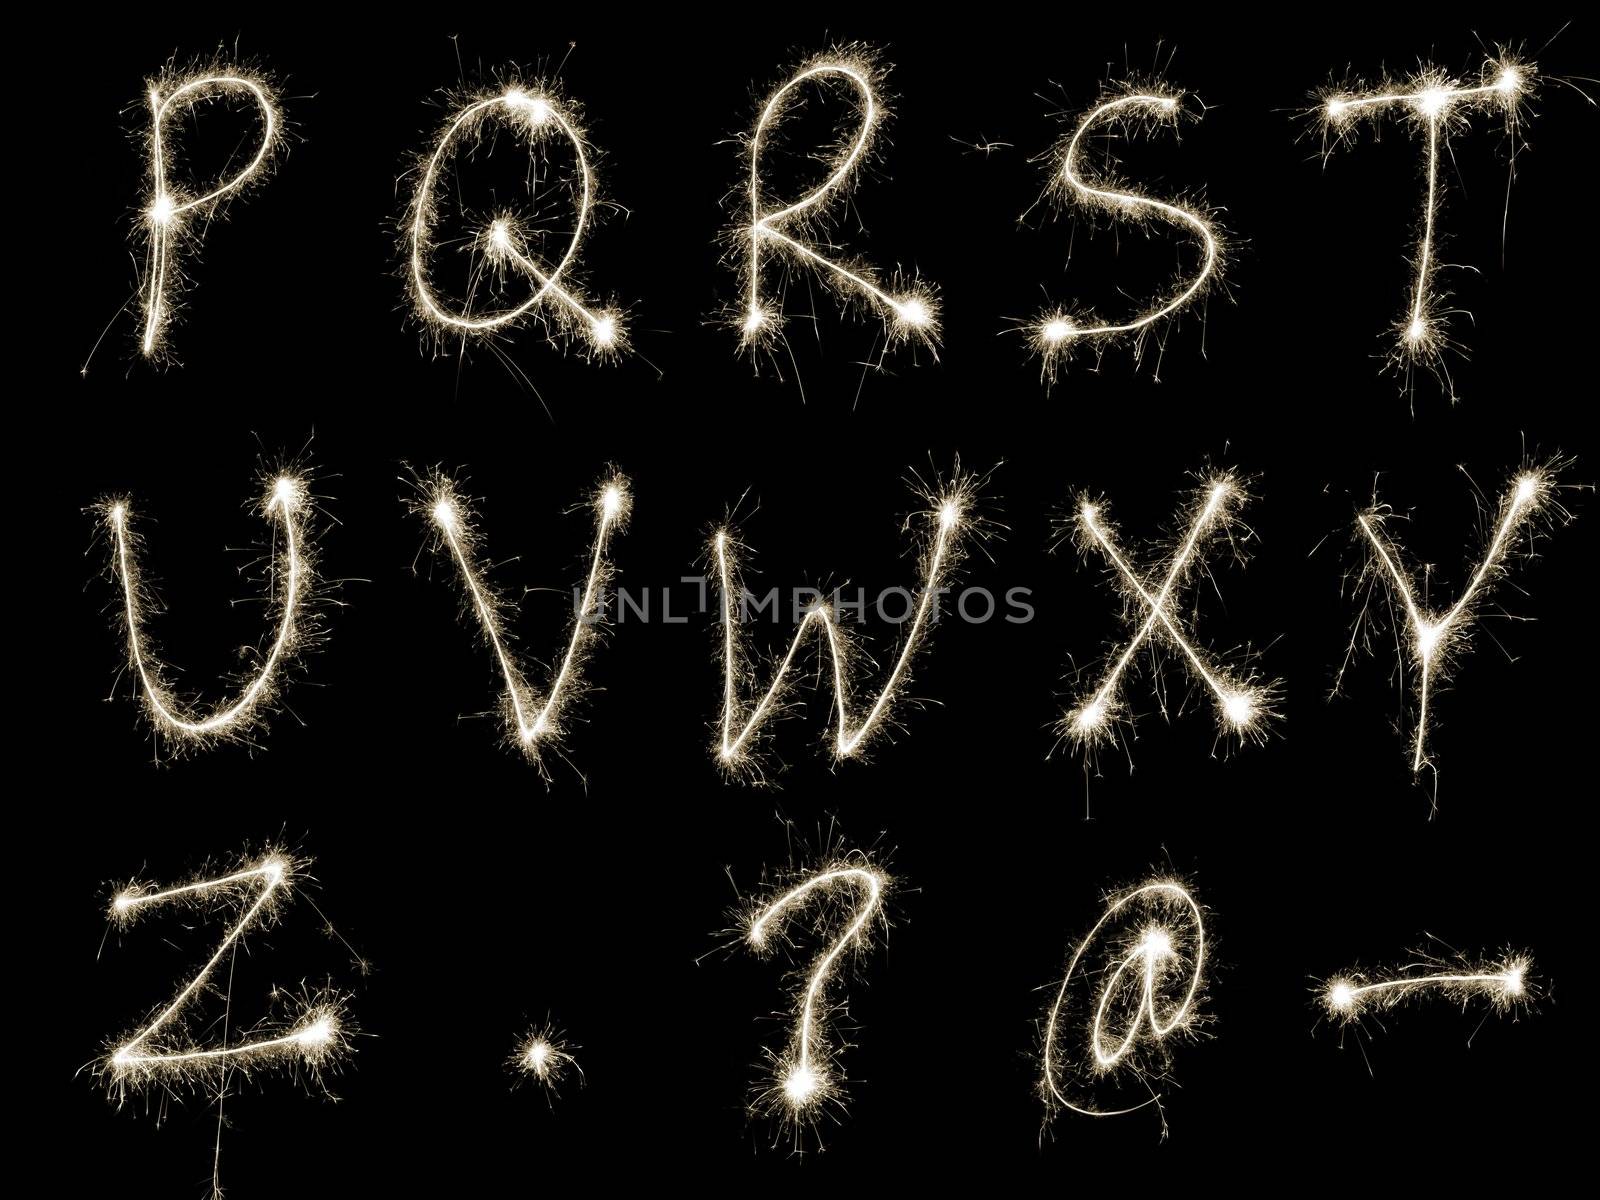 Capital letters R to Z written in sparkler trails, other letters numbers and symbols available separately